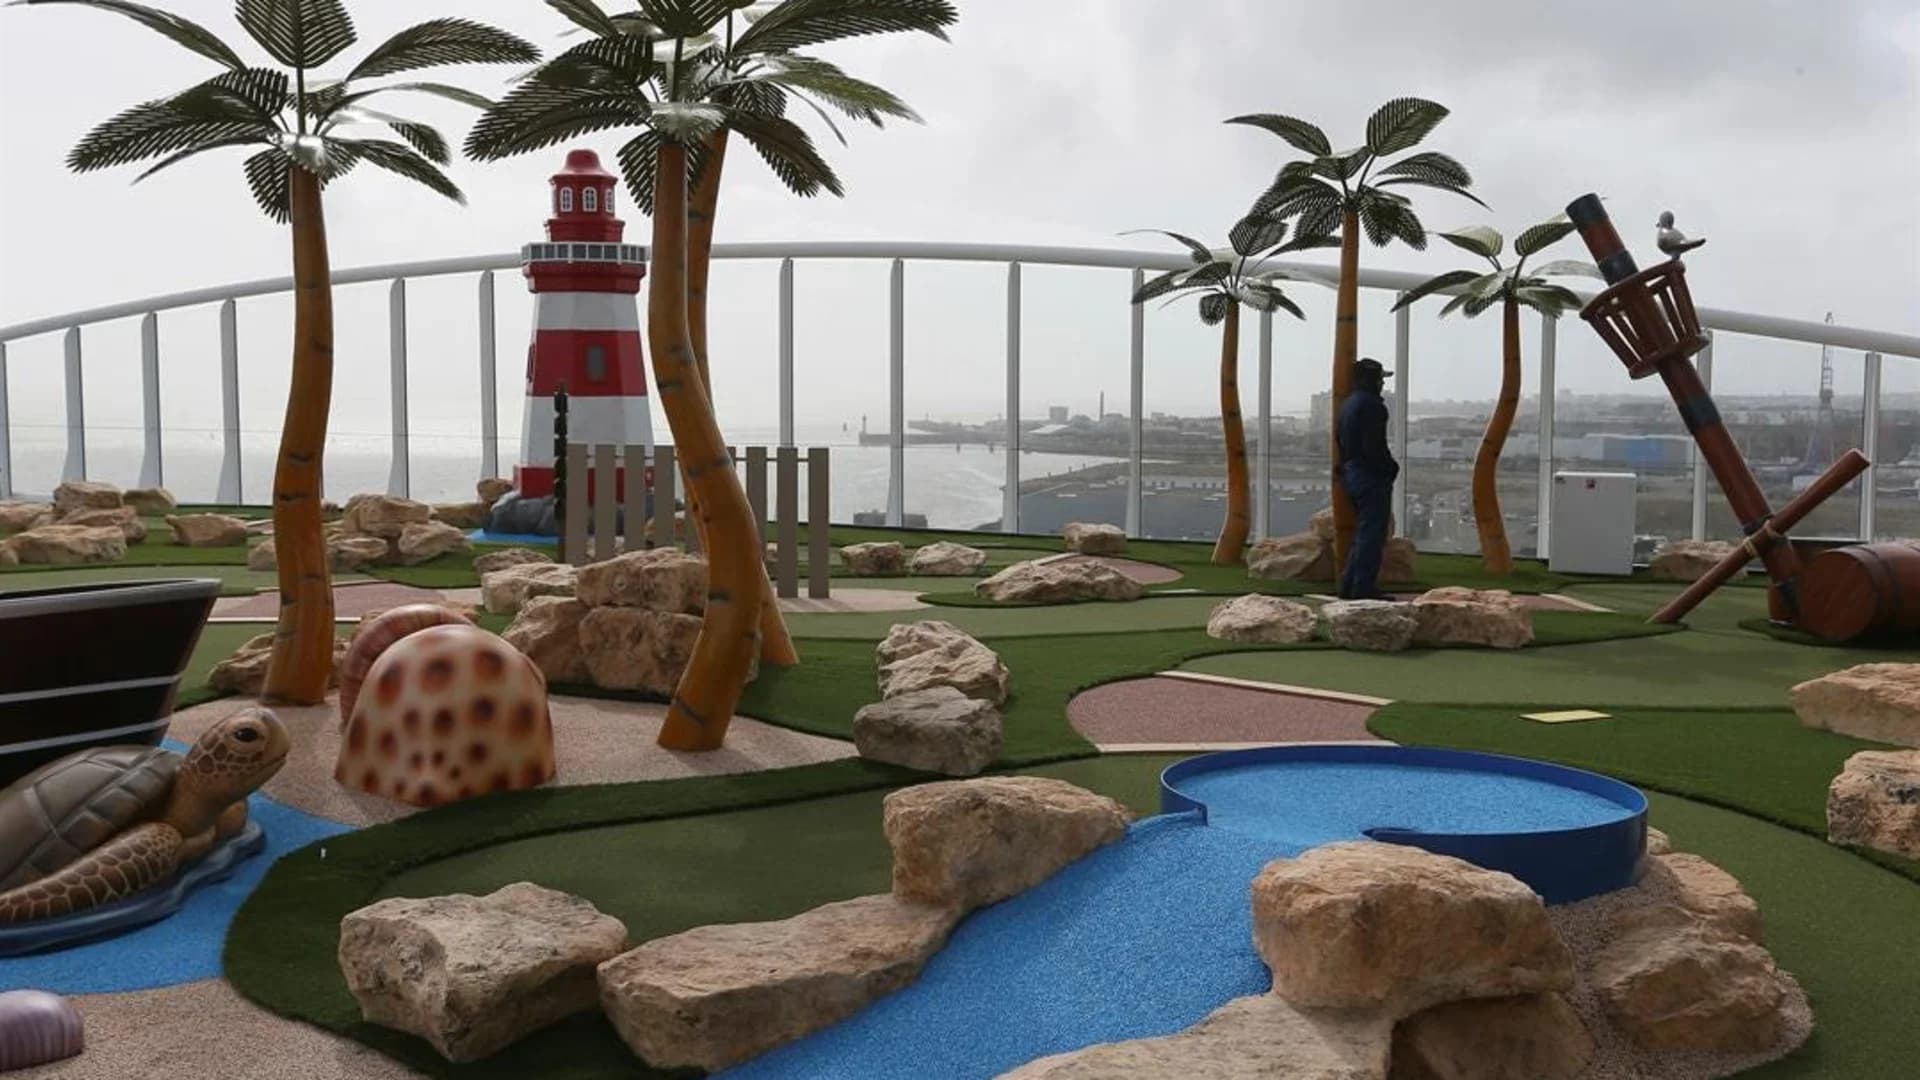 Guide: Mini-golf courses in New York City